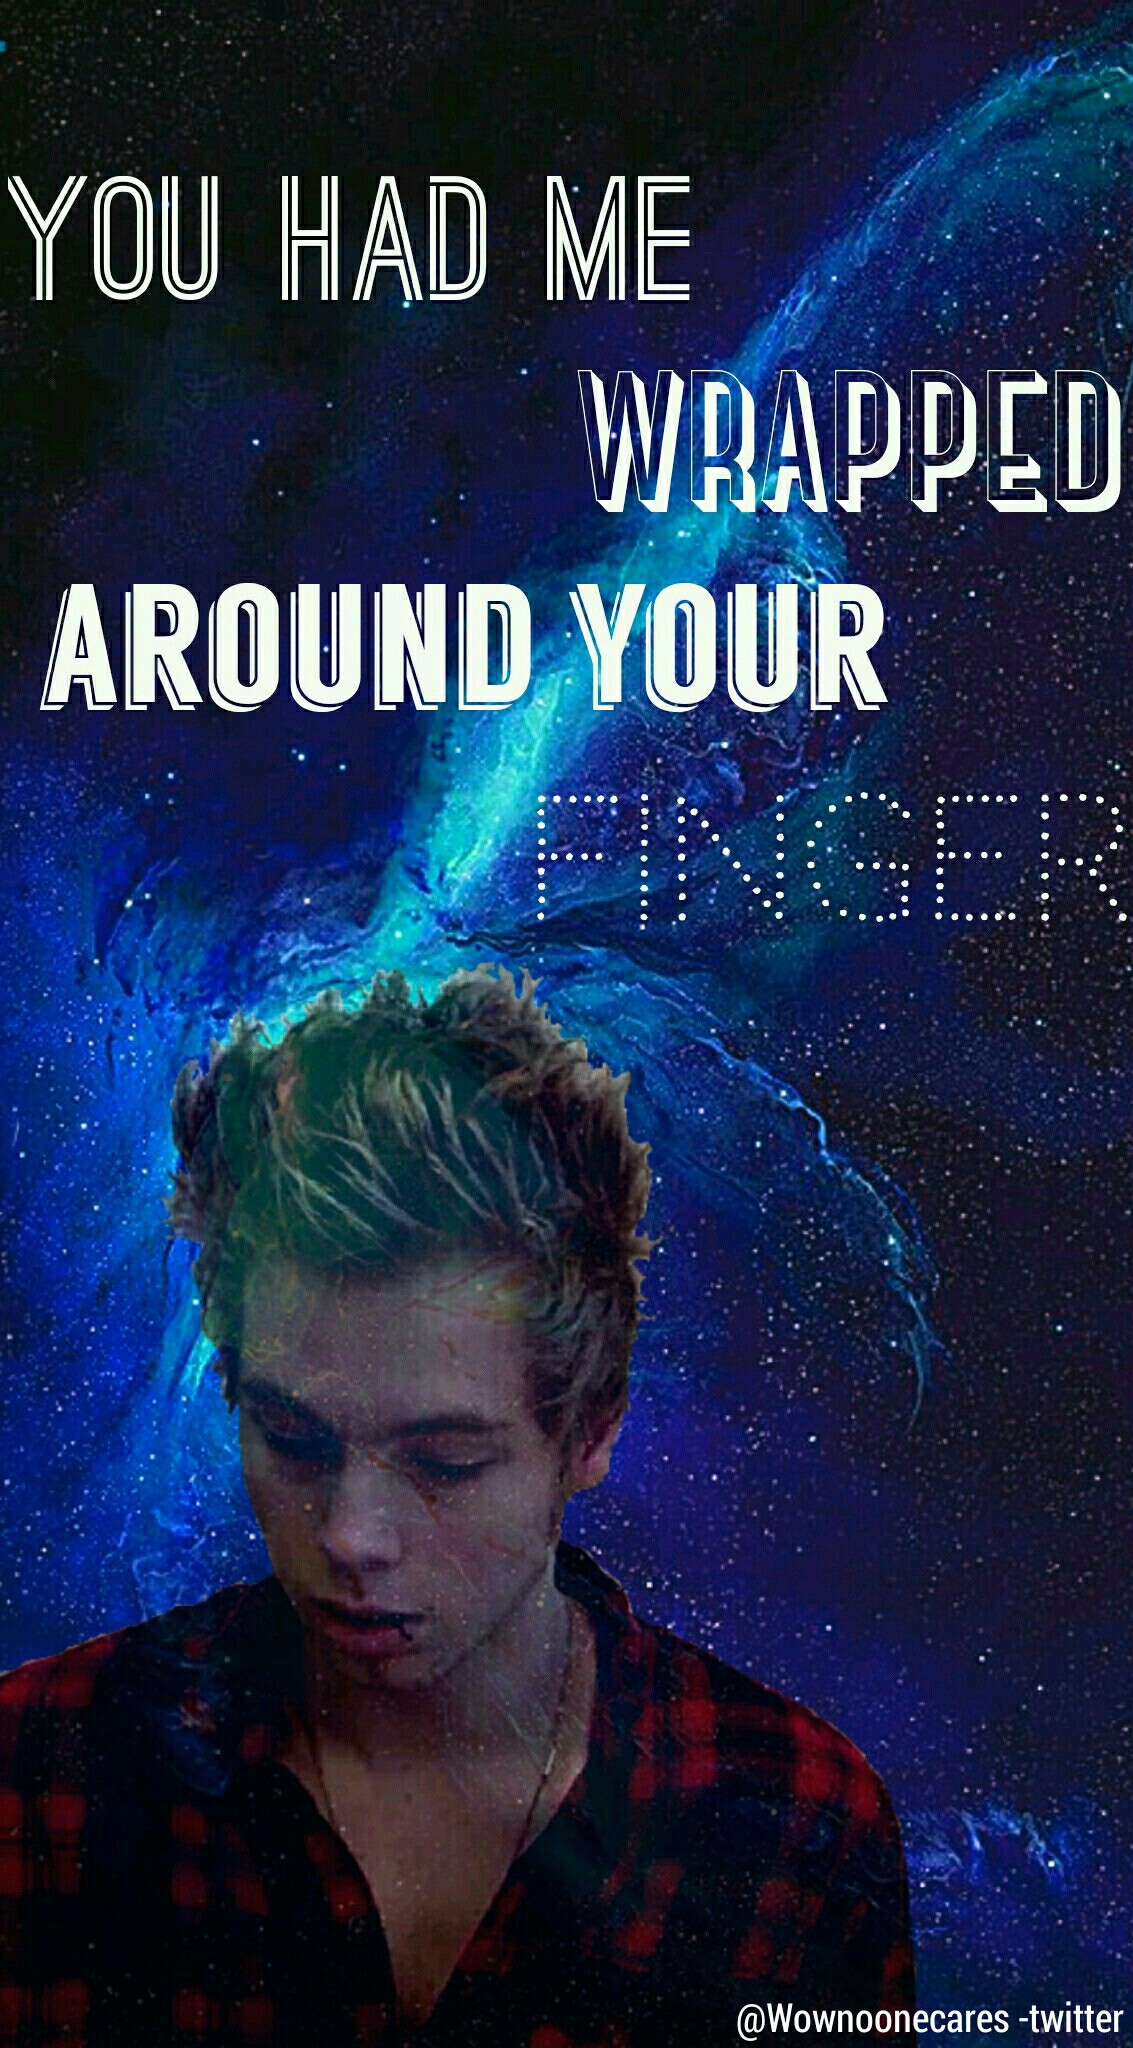 5 seconds of summer wallpaper / / Wrapped around your finger